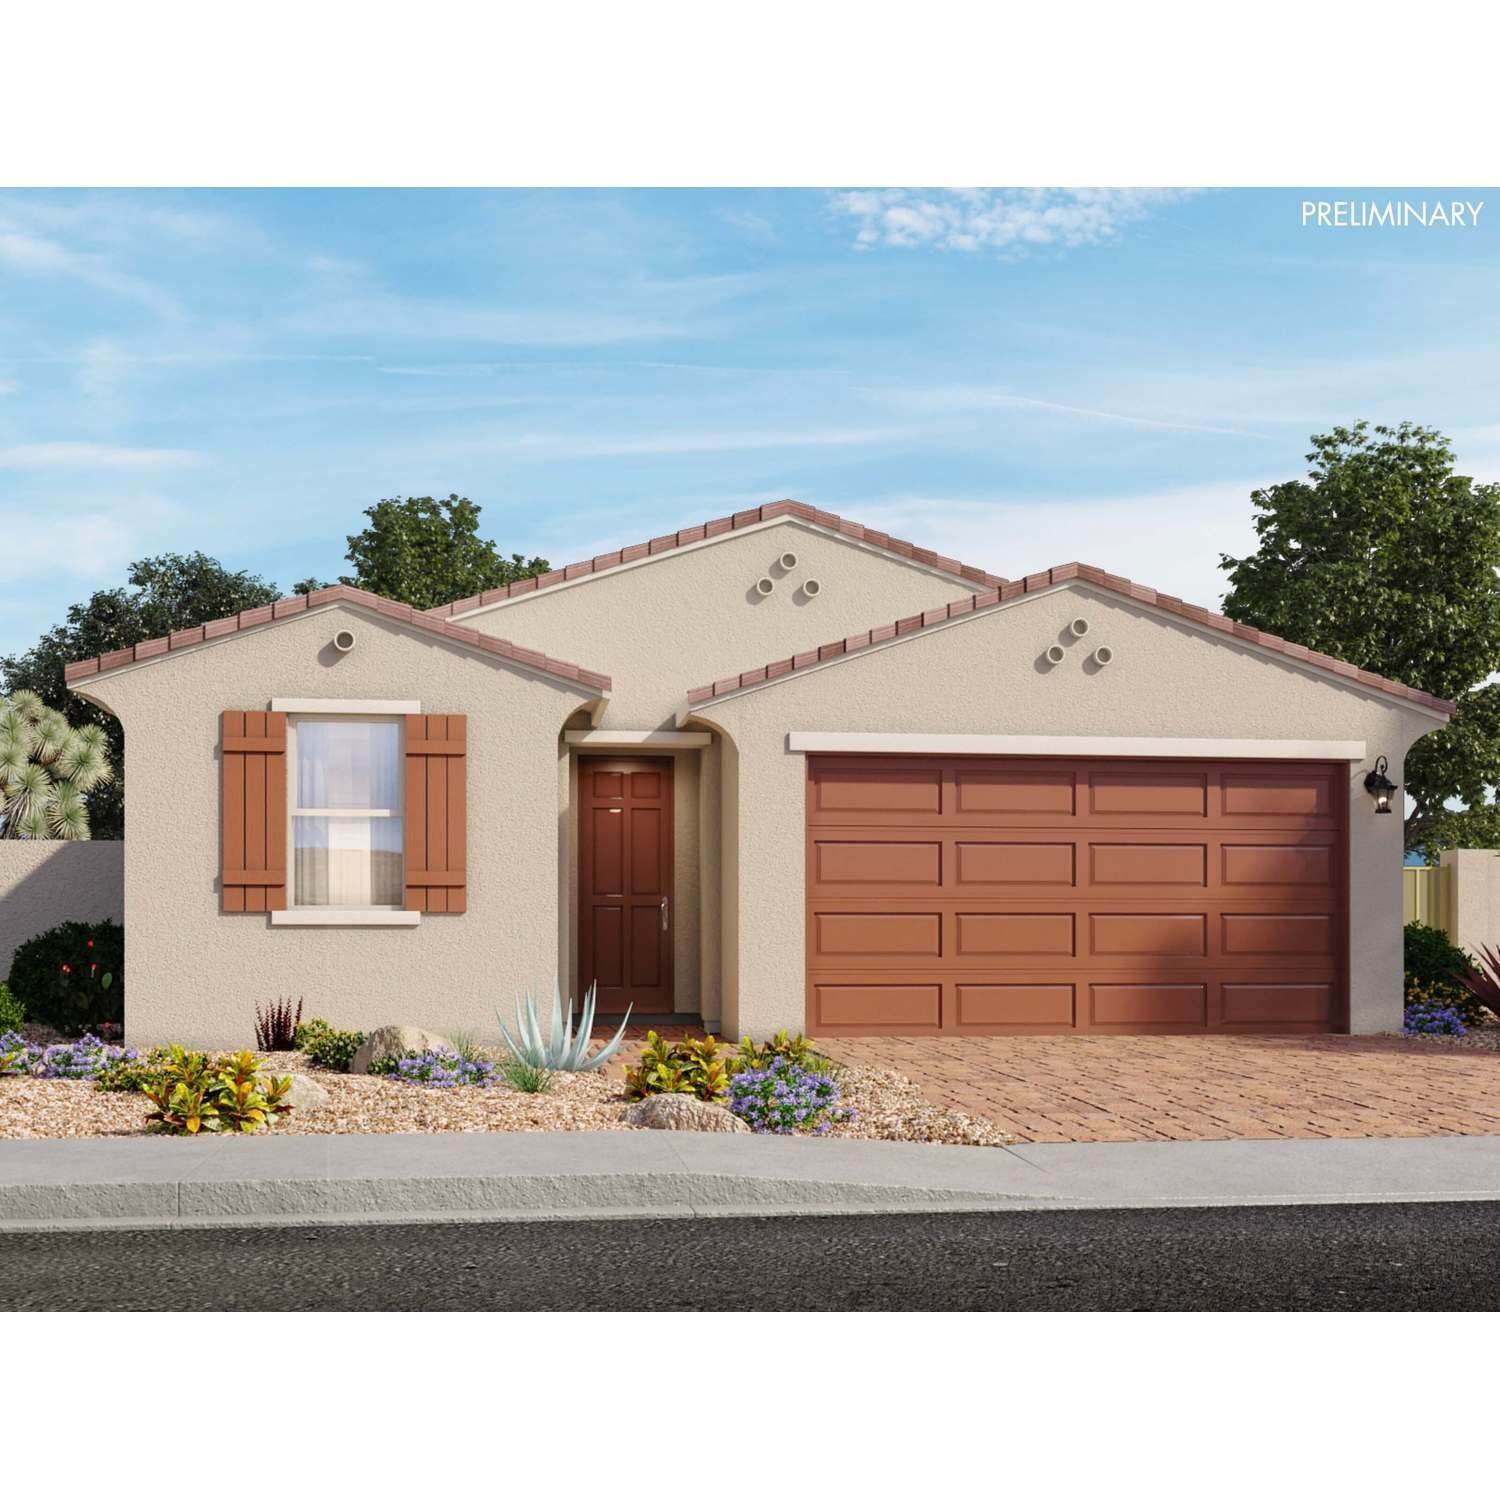 Single Family for Sale at Laveen, AZ 85339